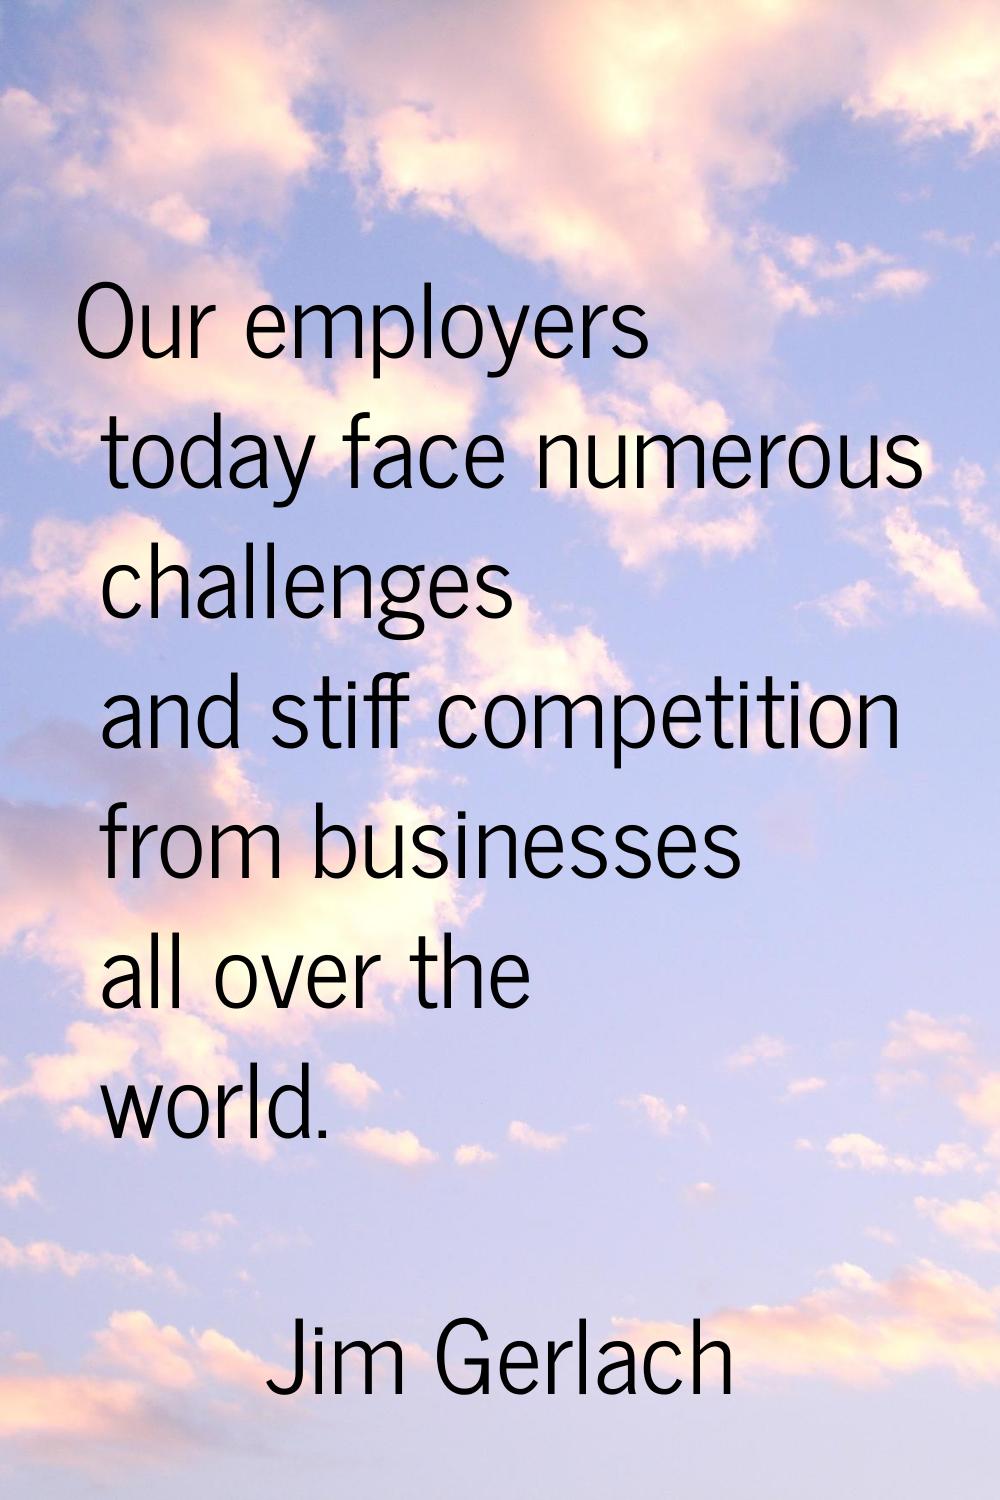 Our employers today face numerous challenges and stiff competition from businesses all over the wor